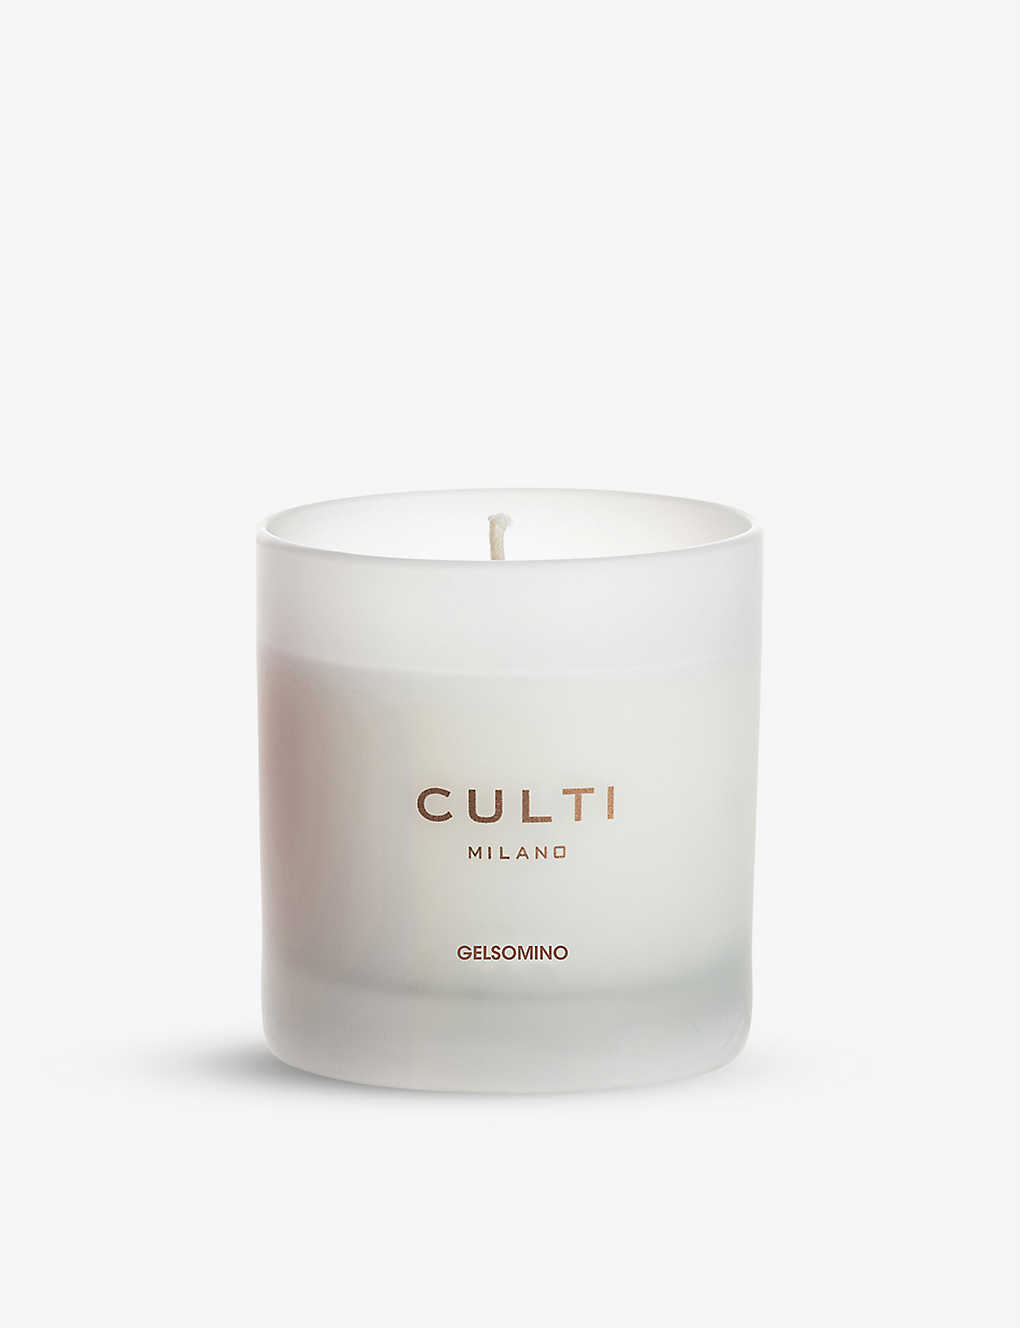 Culti Gelsomino Scented Candle 270g